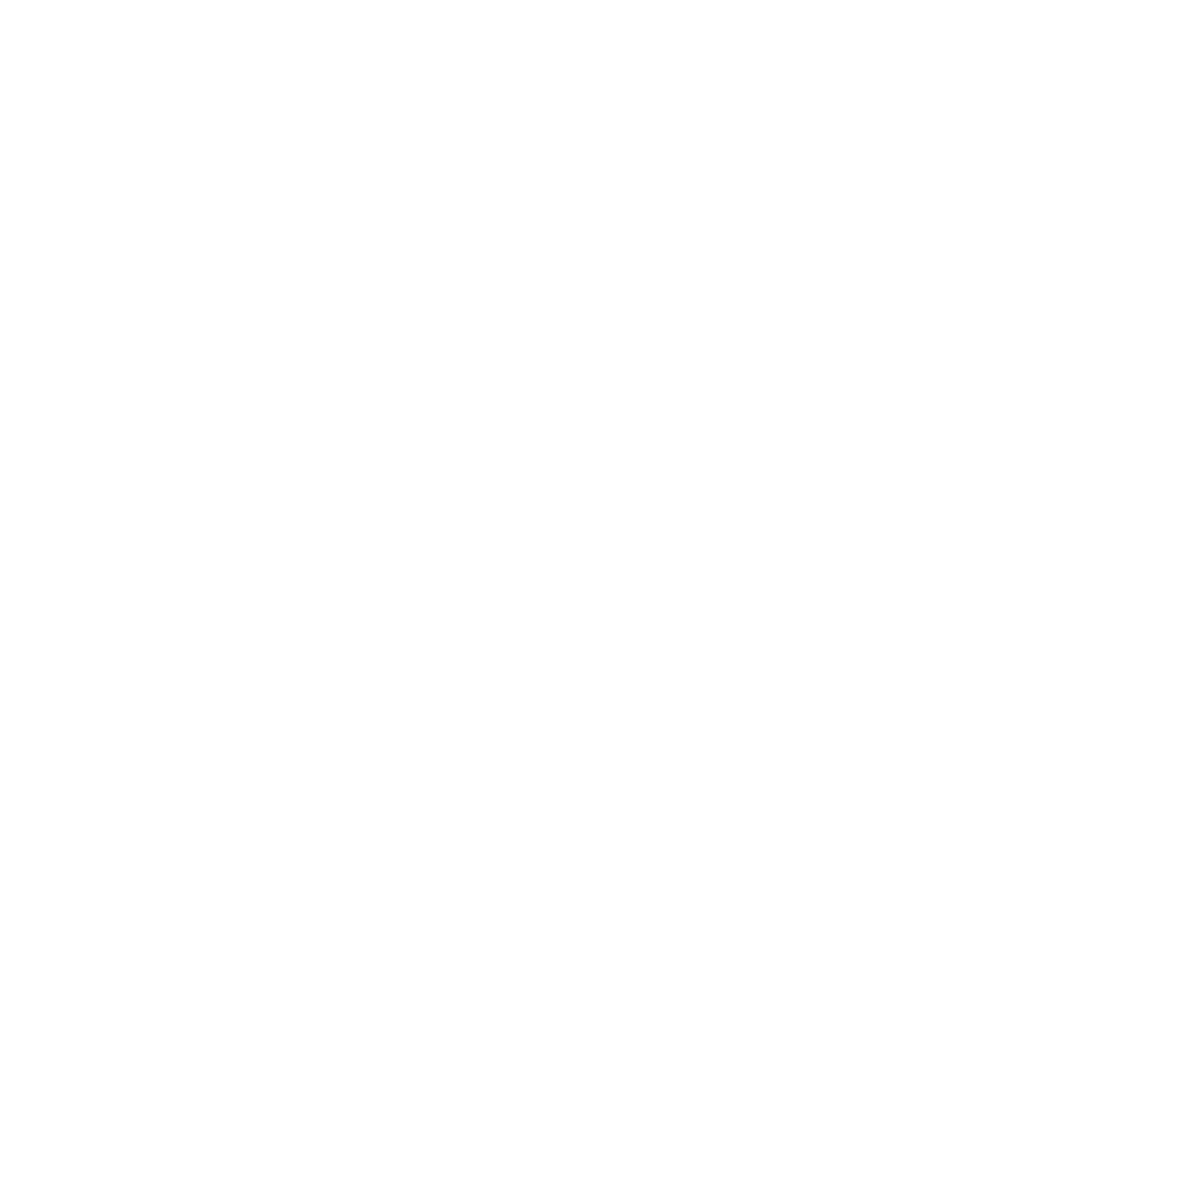 A plain white cartoon image of two people shaking hands to represent our close, friendly relationships with our customers.